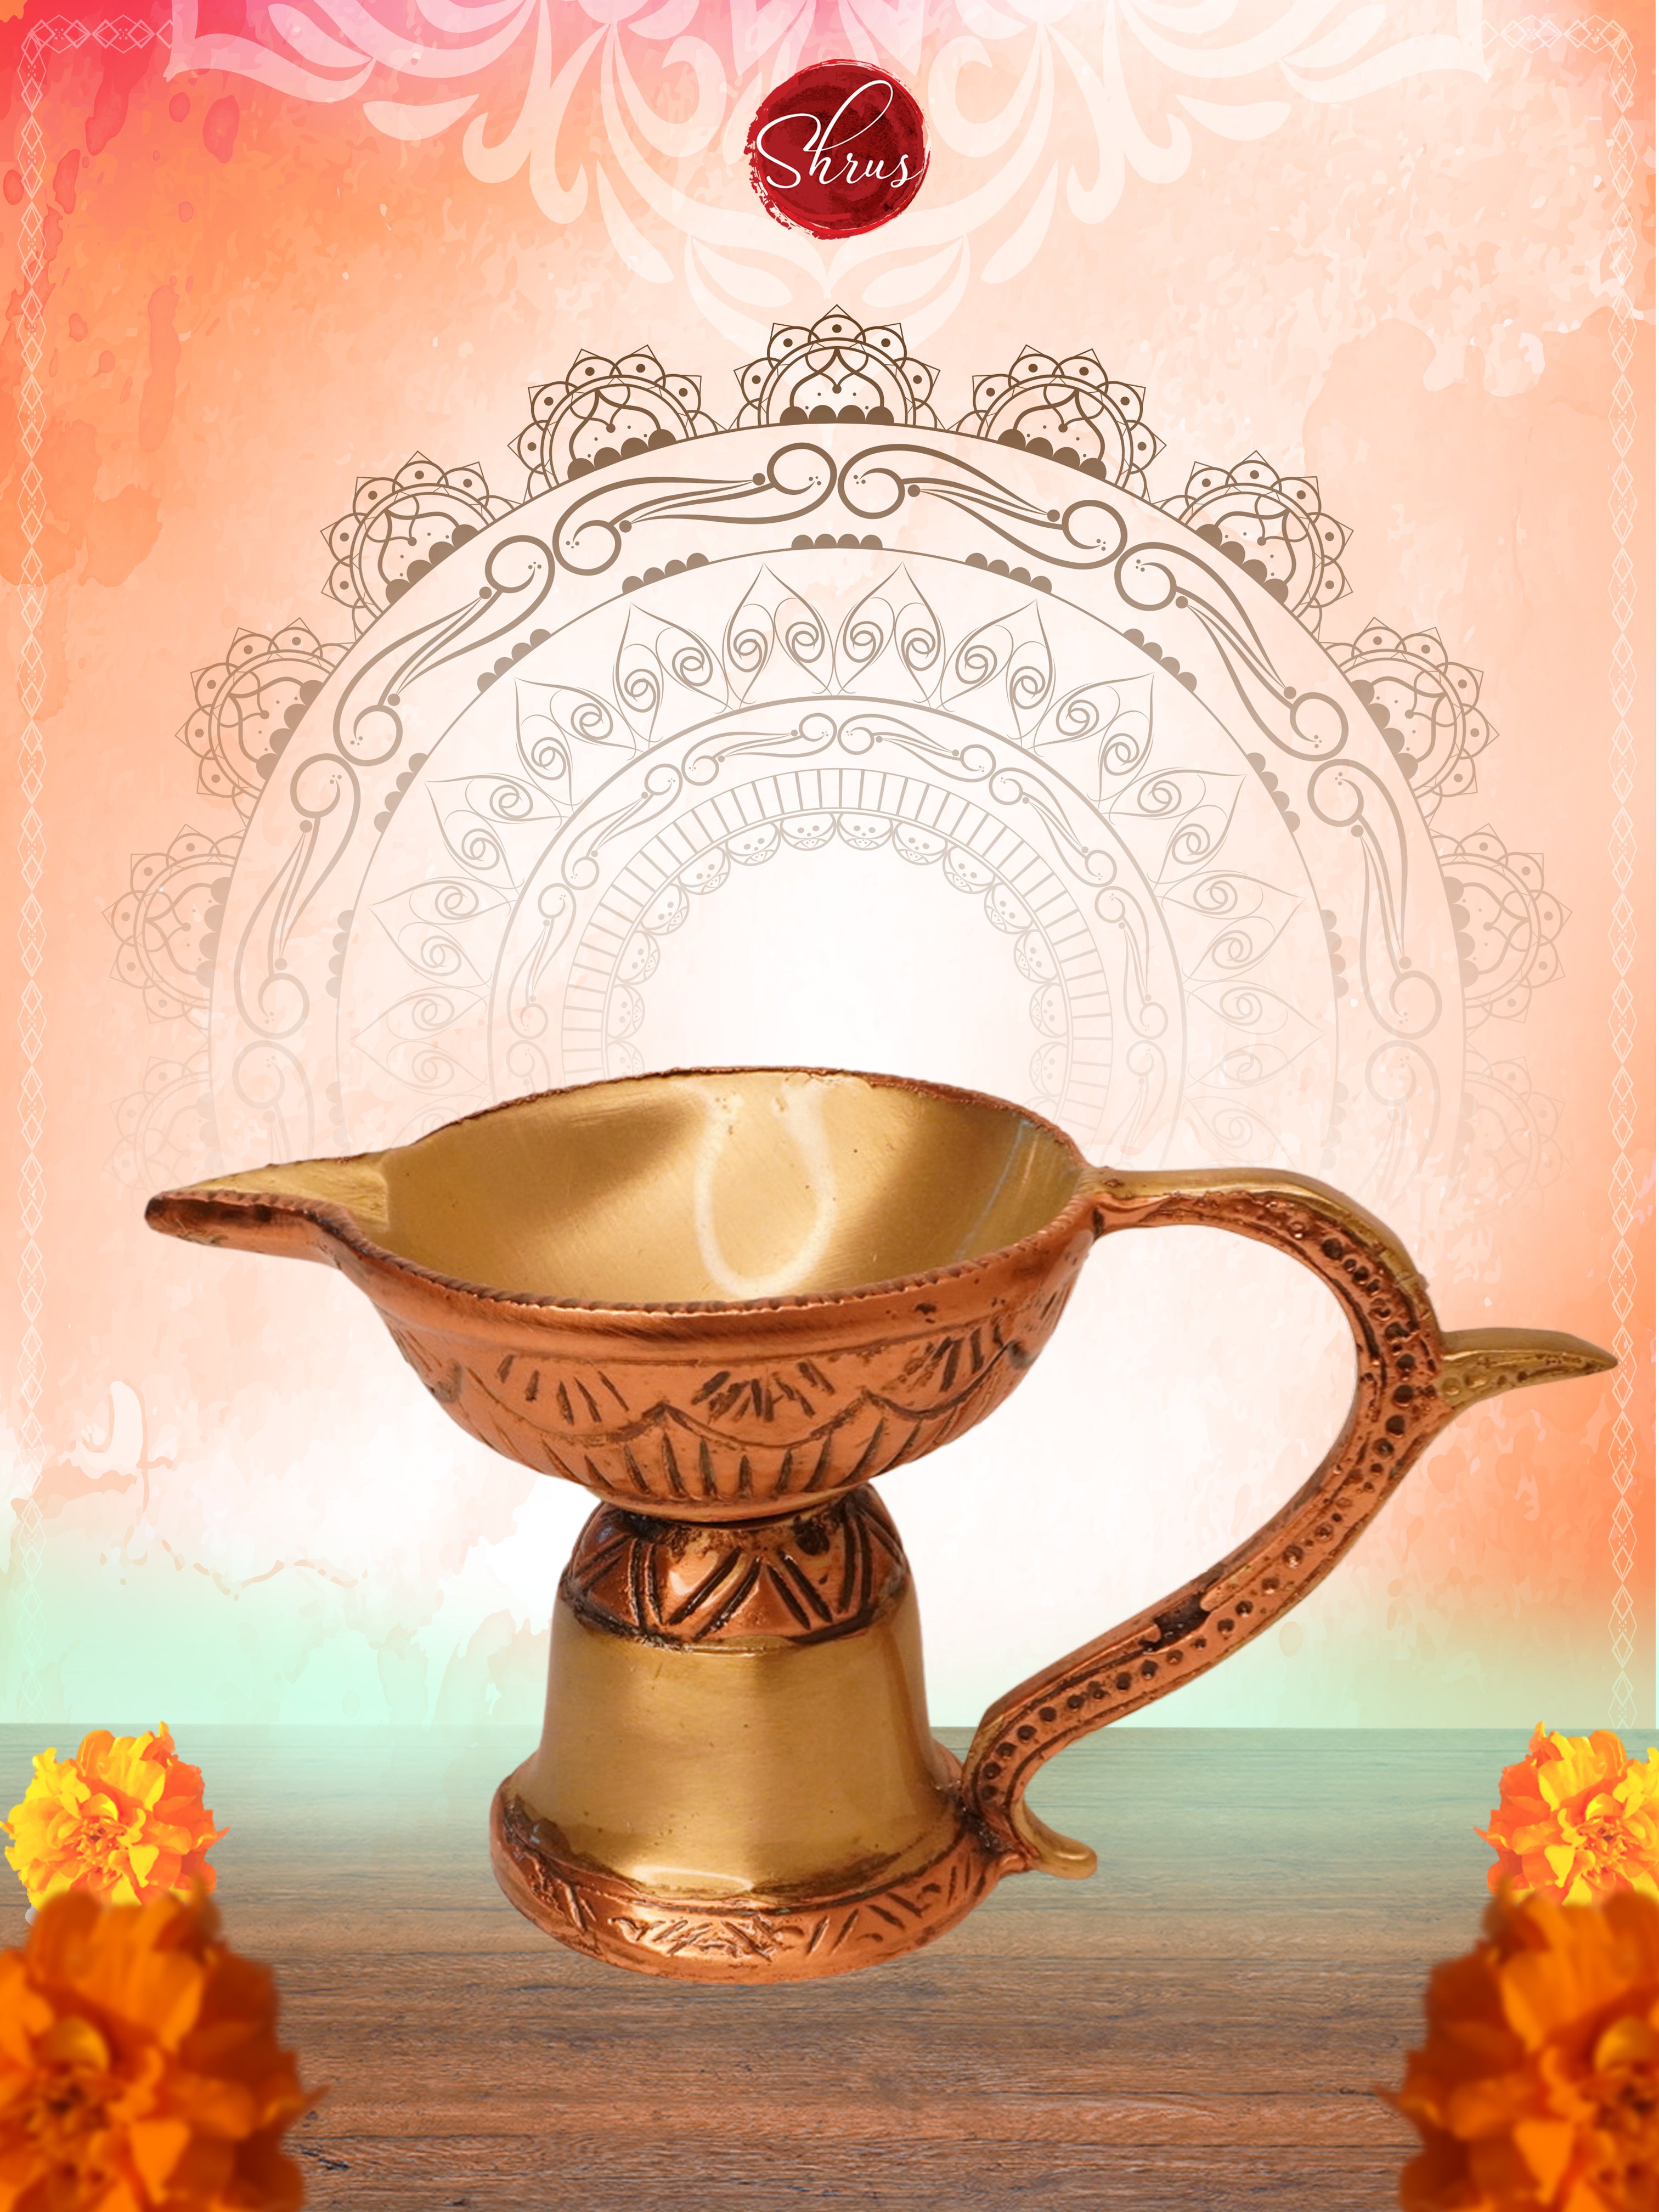 2.7" Brass Agal Deepam / Oil Lamp/ Diyas for Puja room and Home Decor in Dual Tone Finish (Pack of Two) - Shop on ShrusEternity.com